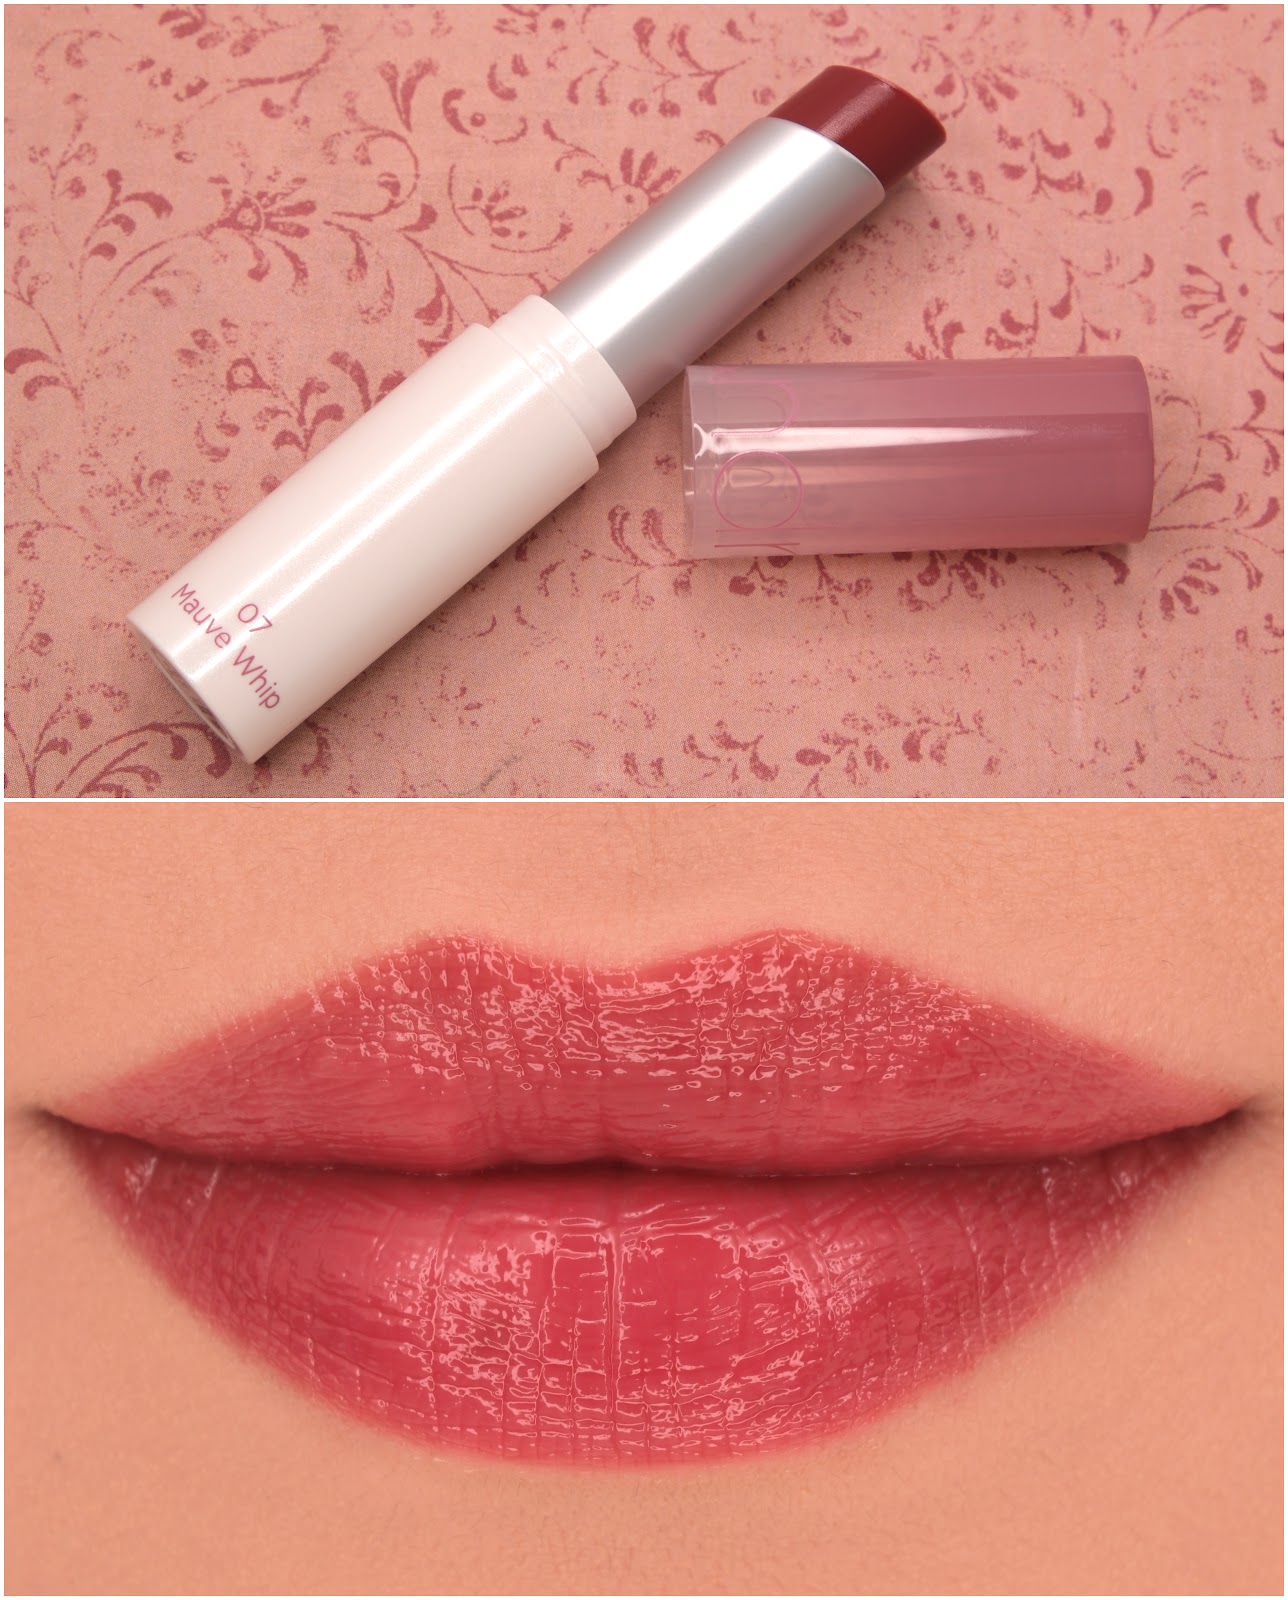 Romand | Glasting Melting Balm in "07 Mauve Whip": Review and Swatches